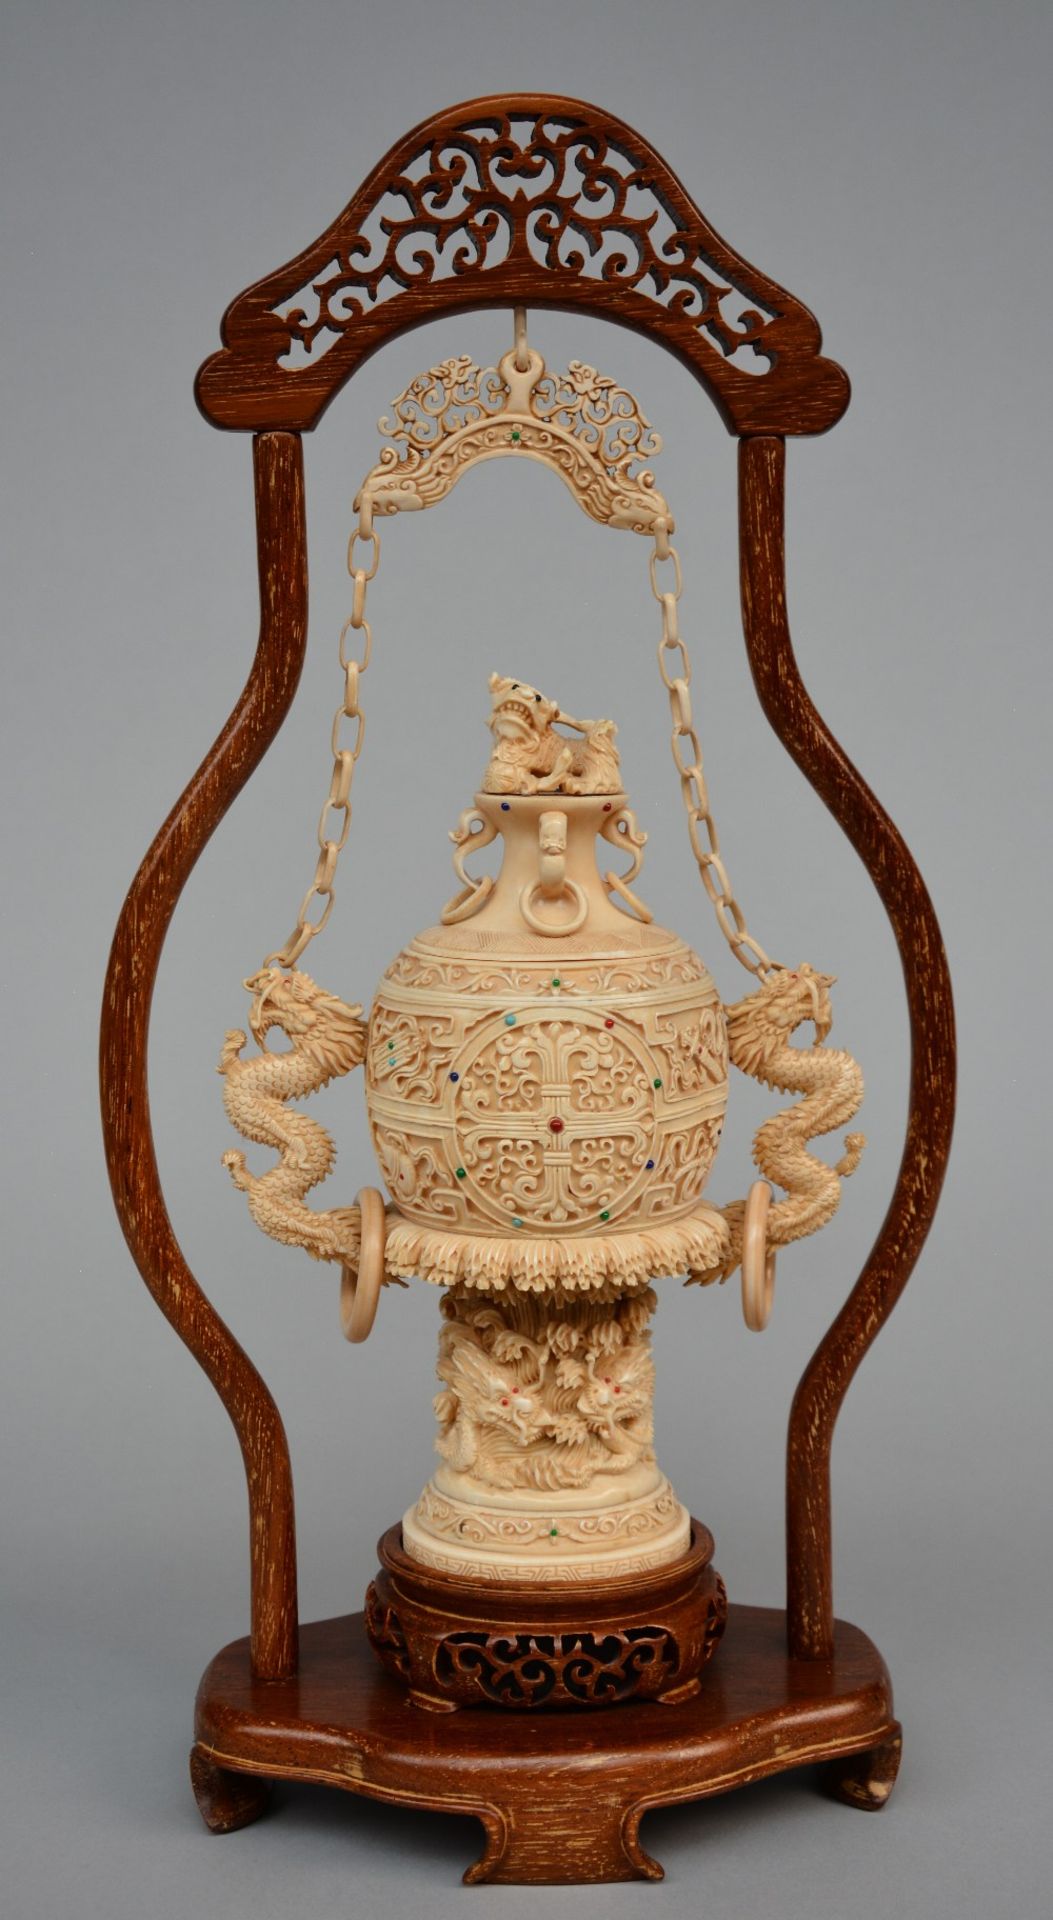 A Chinese ivory vase with cover with relief decoration of dragons, inlaid with various precious